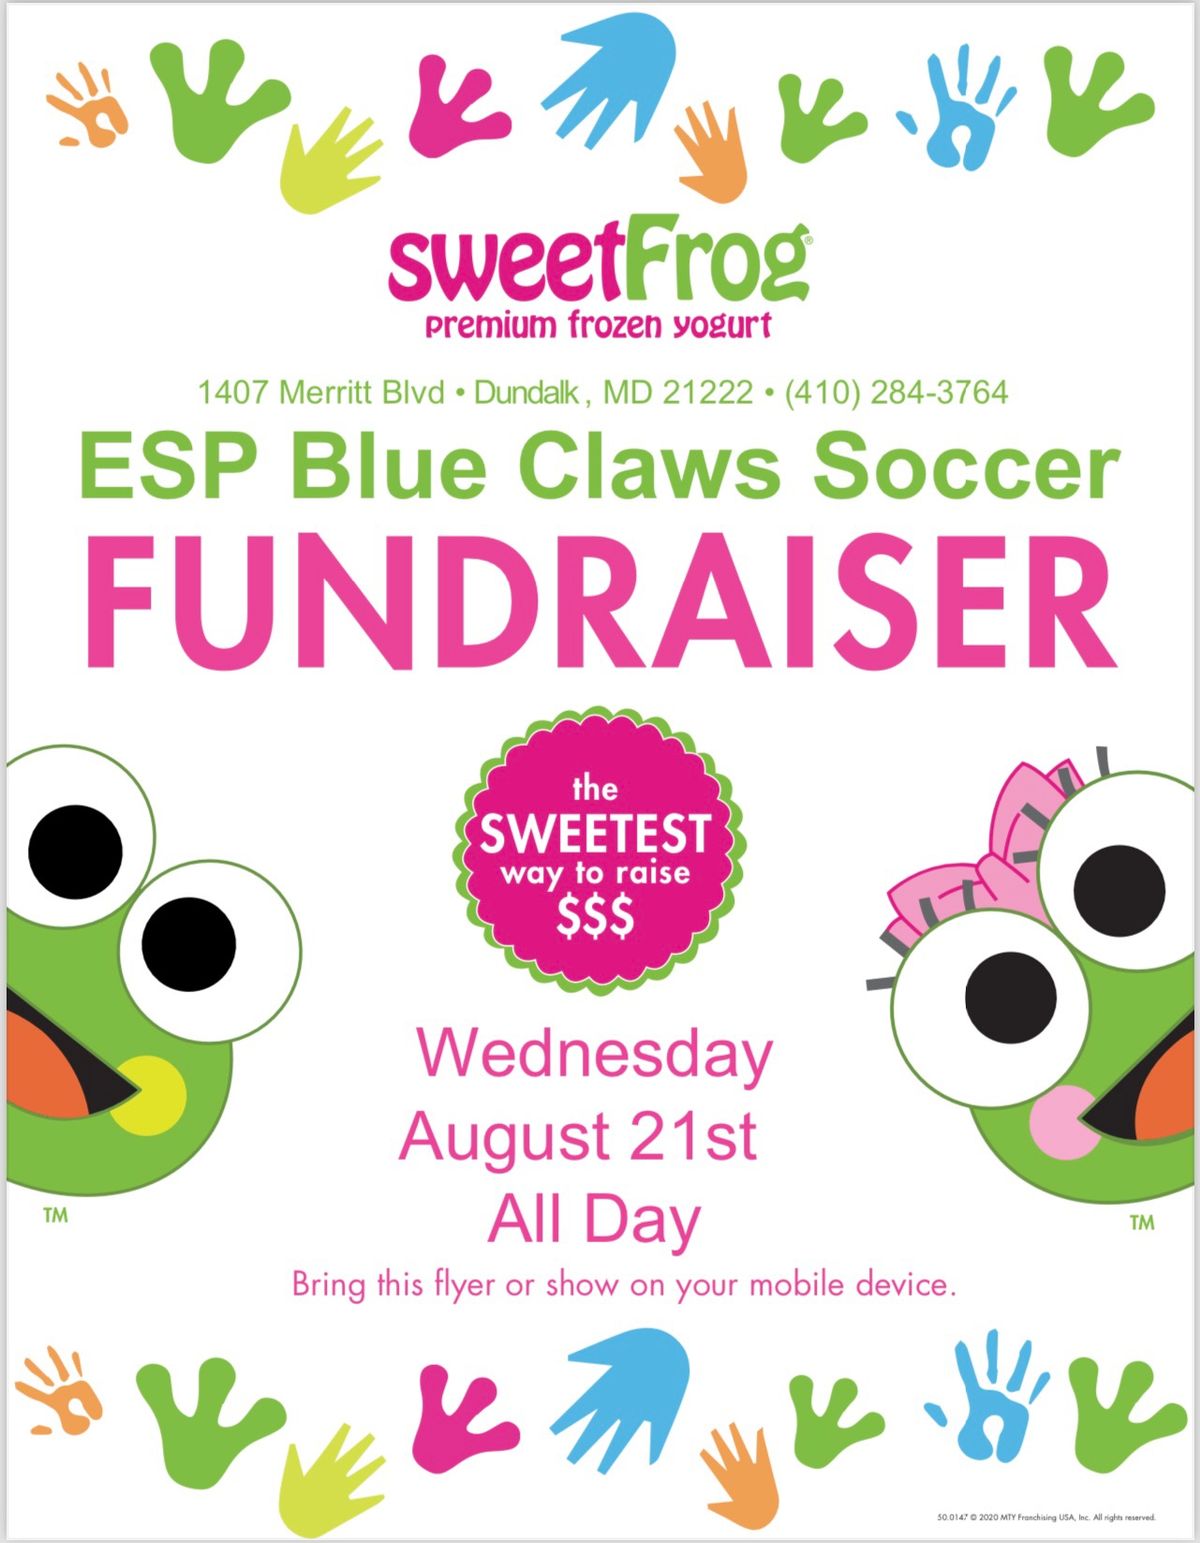 Blue Claws Sweet Frog Fundraiser